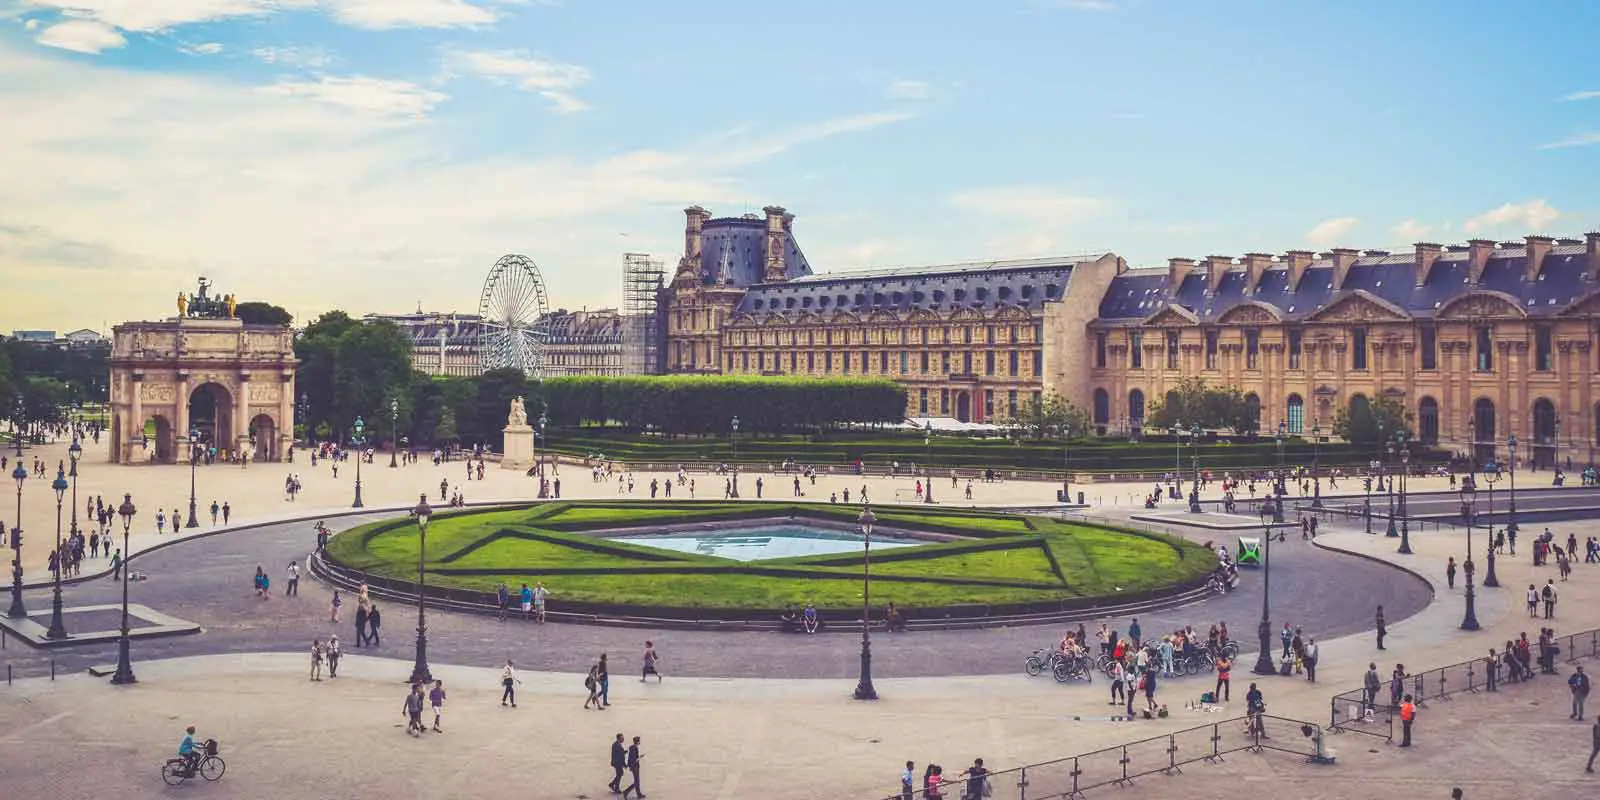 Landscape view of the side of the Louvre museum in Paris.